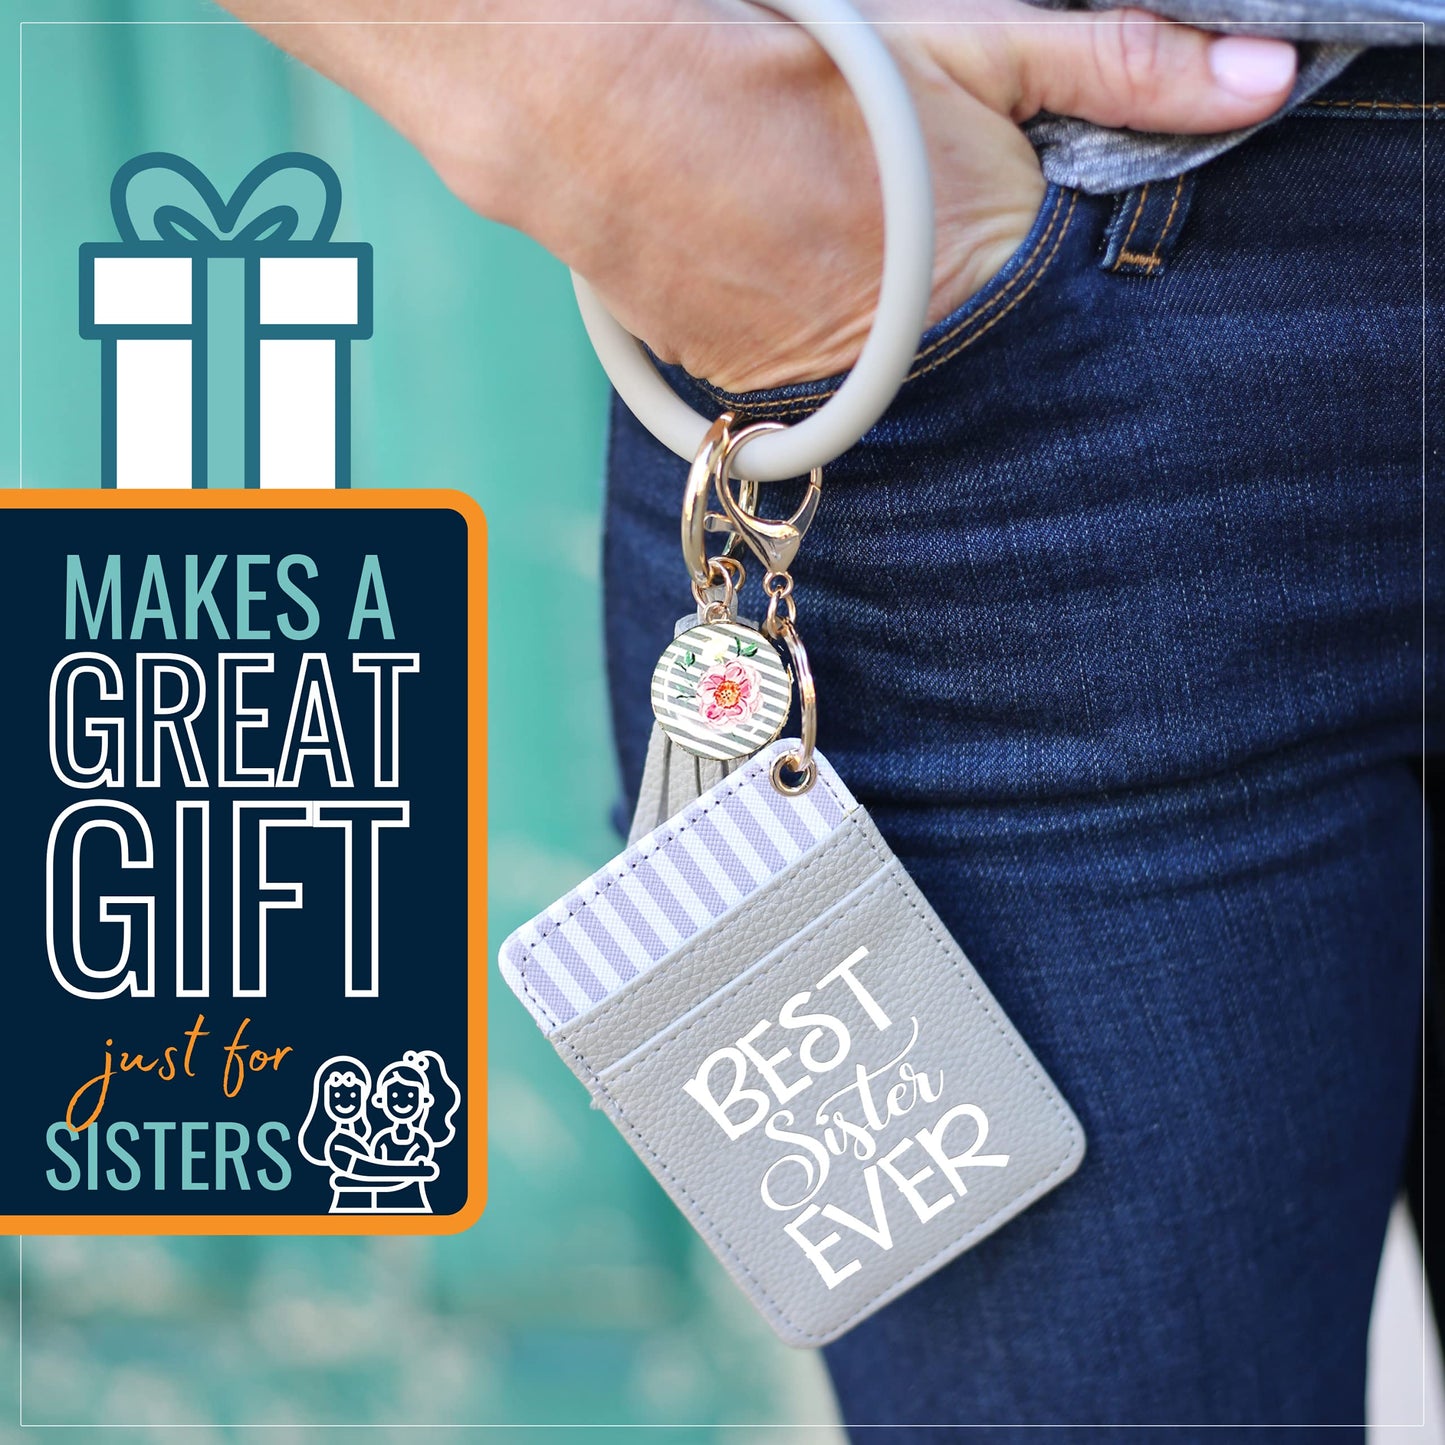 Best Sister Ever Gray Silicone Bracelet Keychain Wallet for Sister